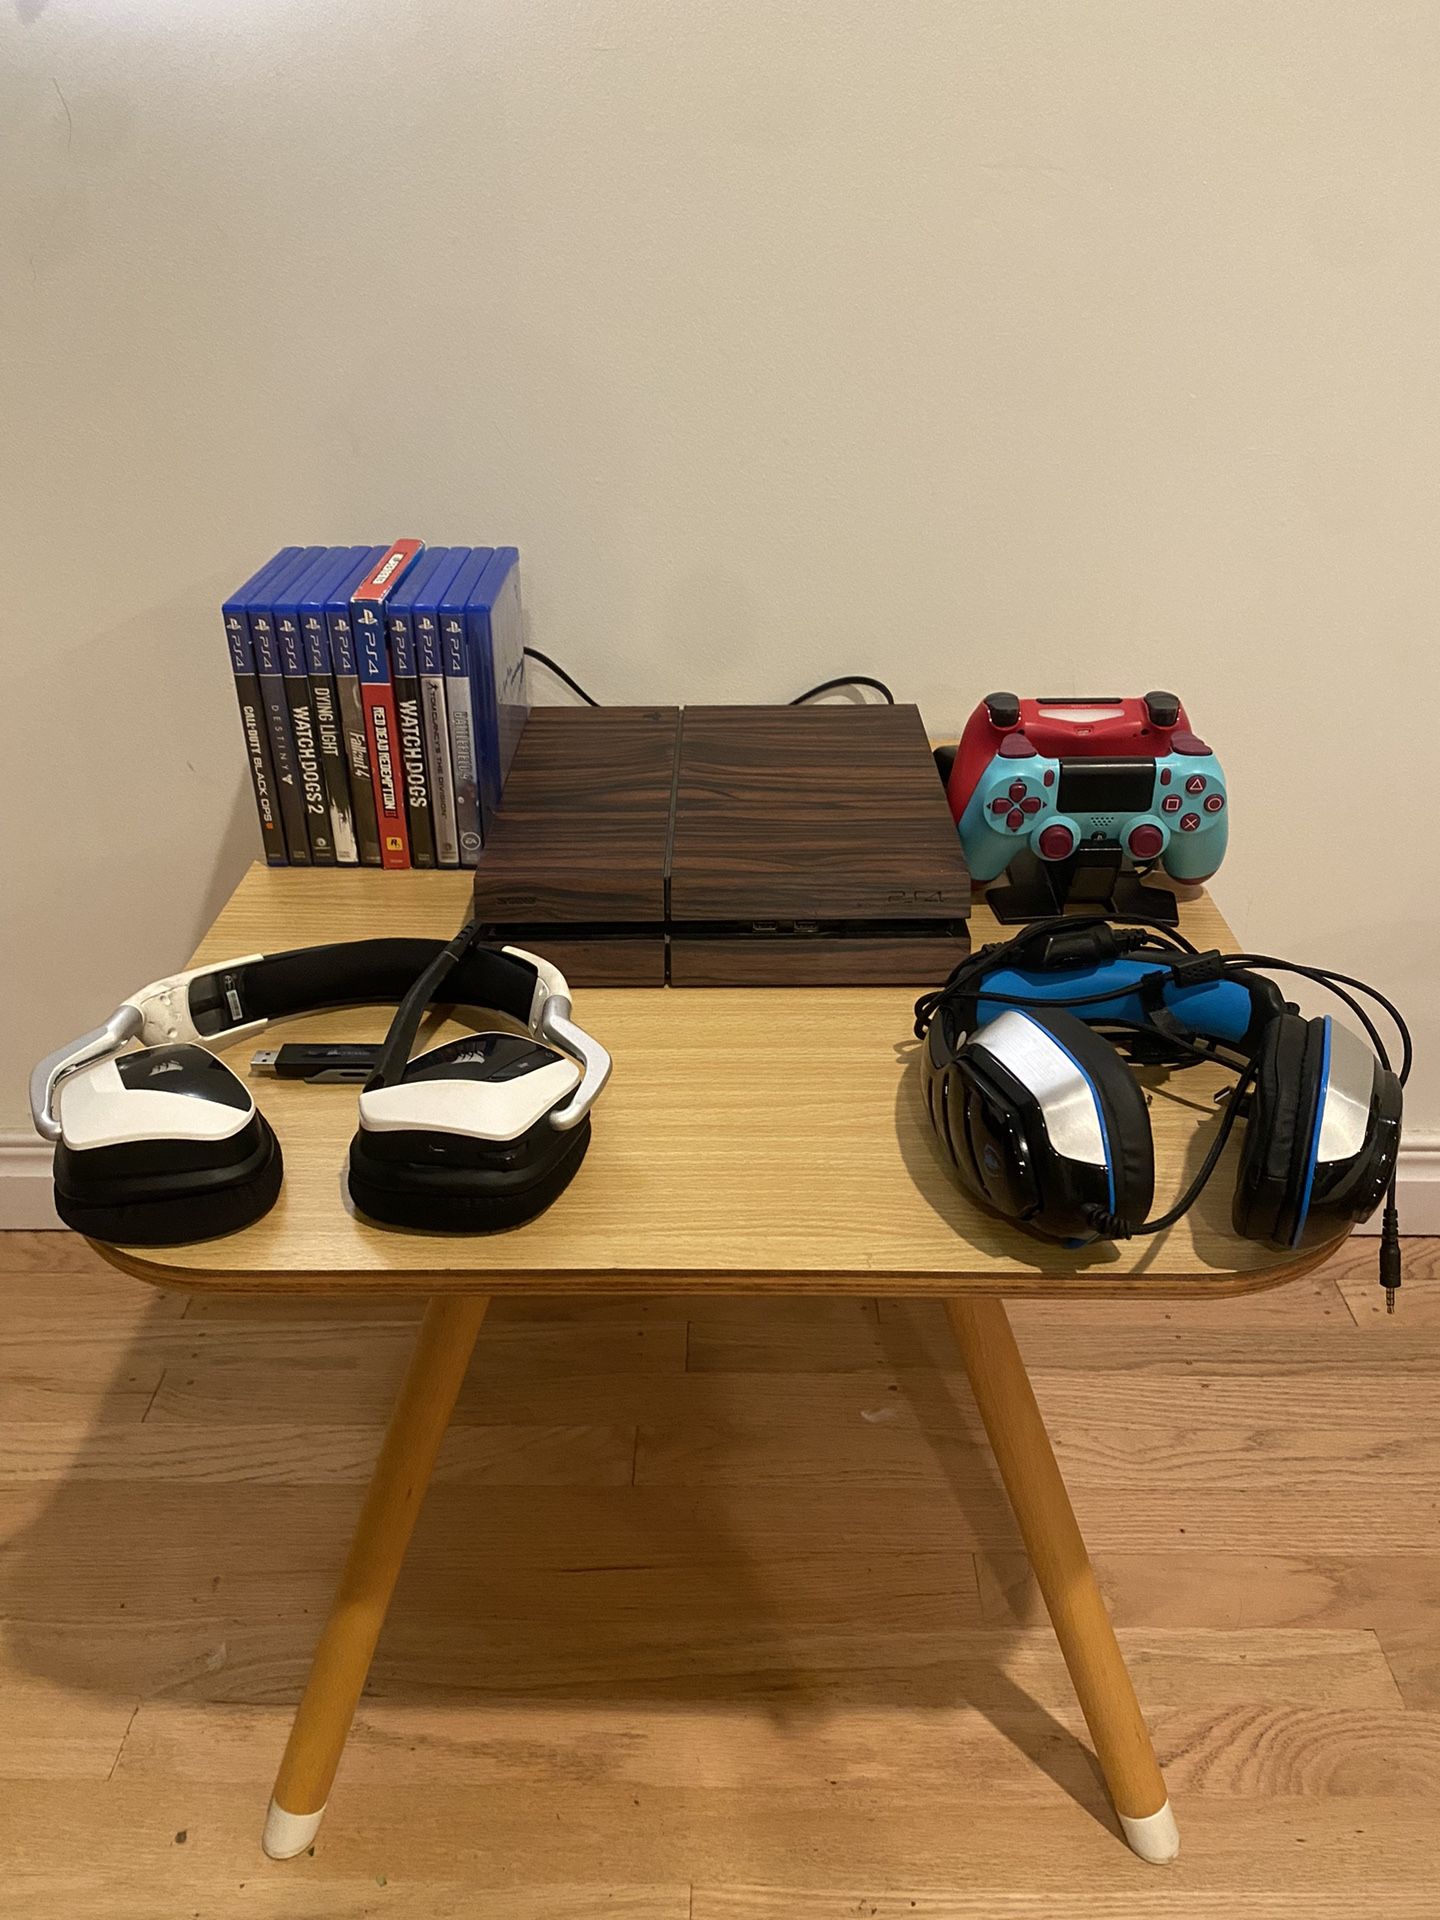 PS4, 2 Controllers, 2 Headsets, 10 Games